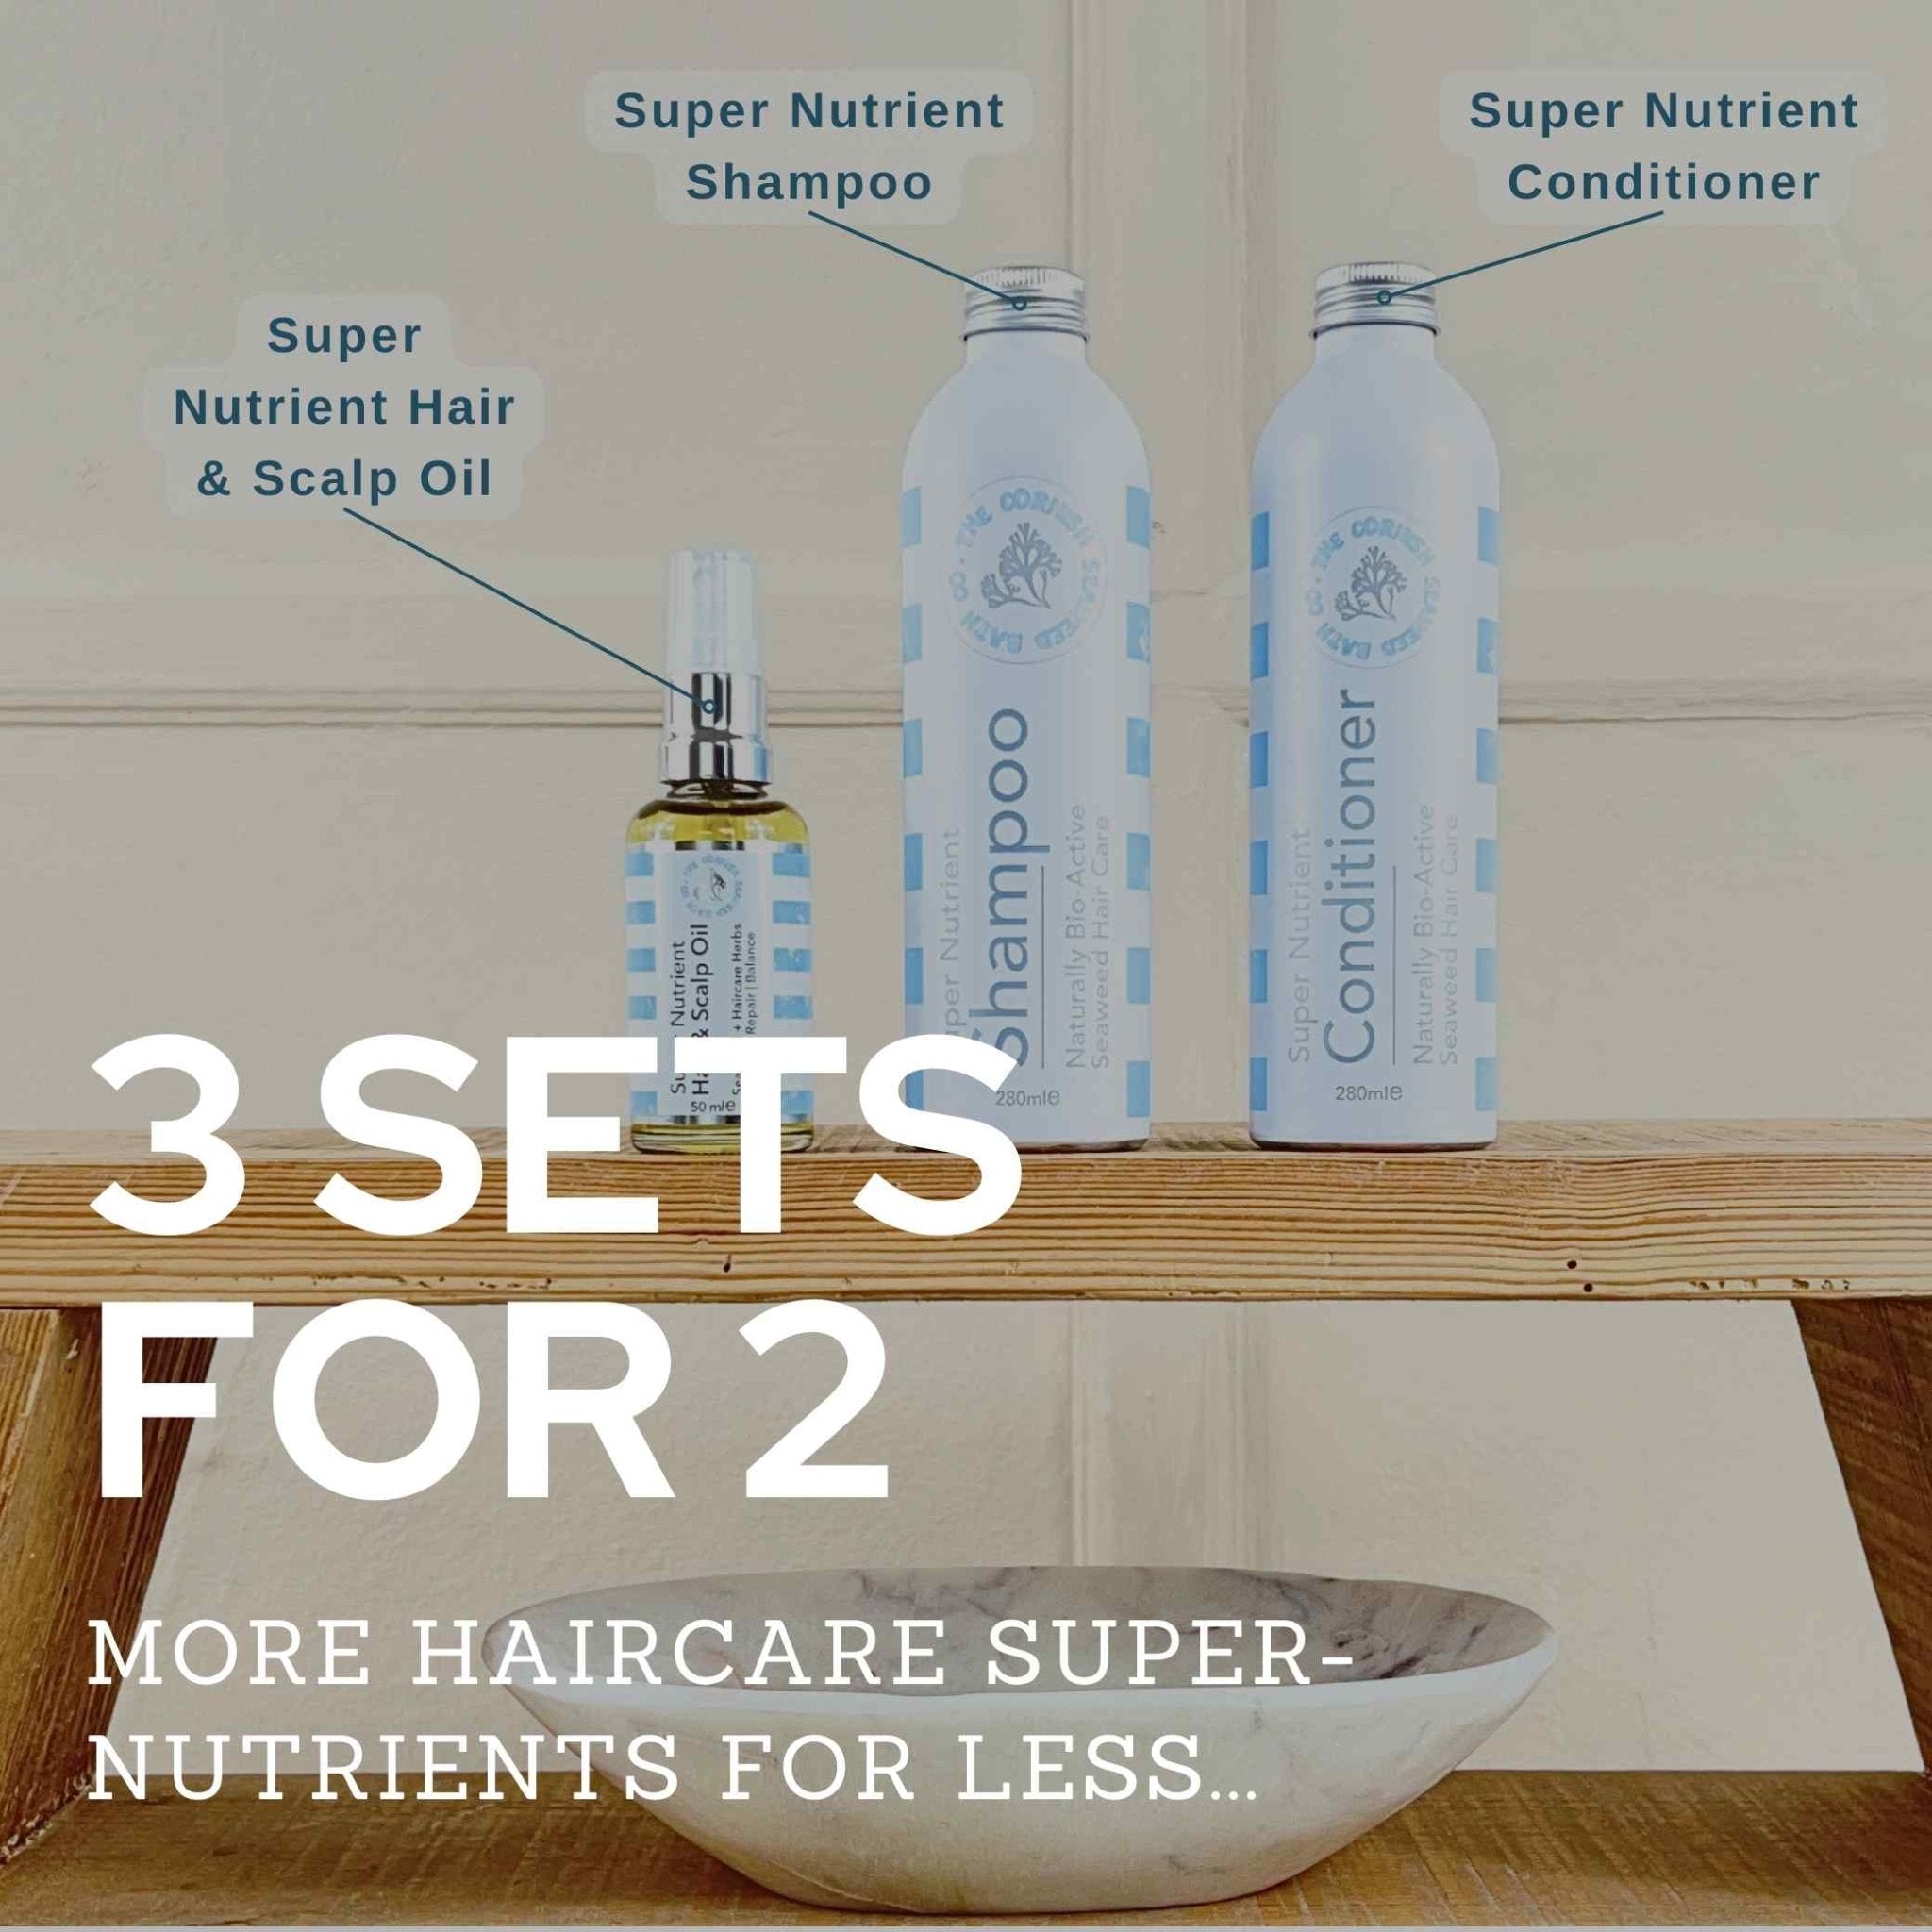 3 For 2 - Super Nutrient Haircare Plus Sets - The Cornish Seaweed Bath Co.